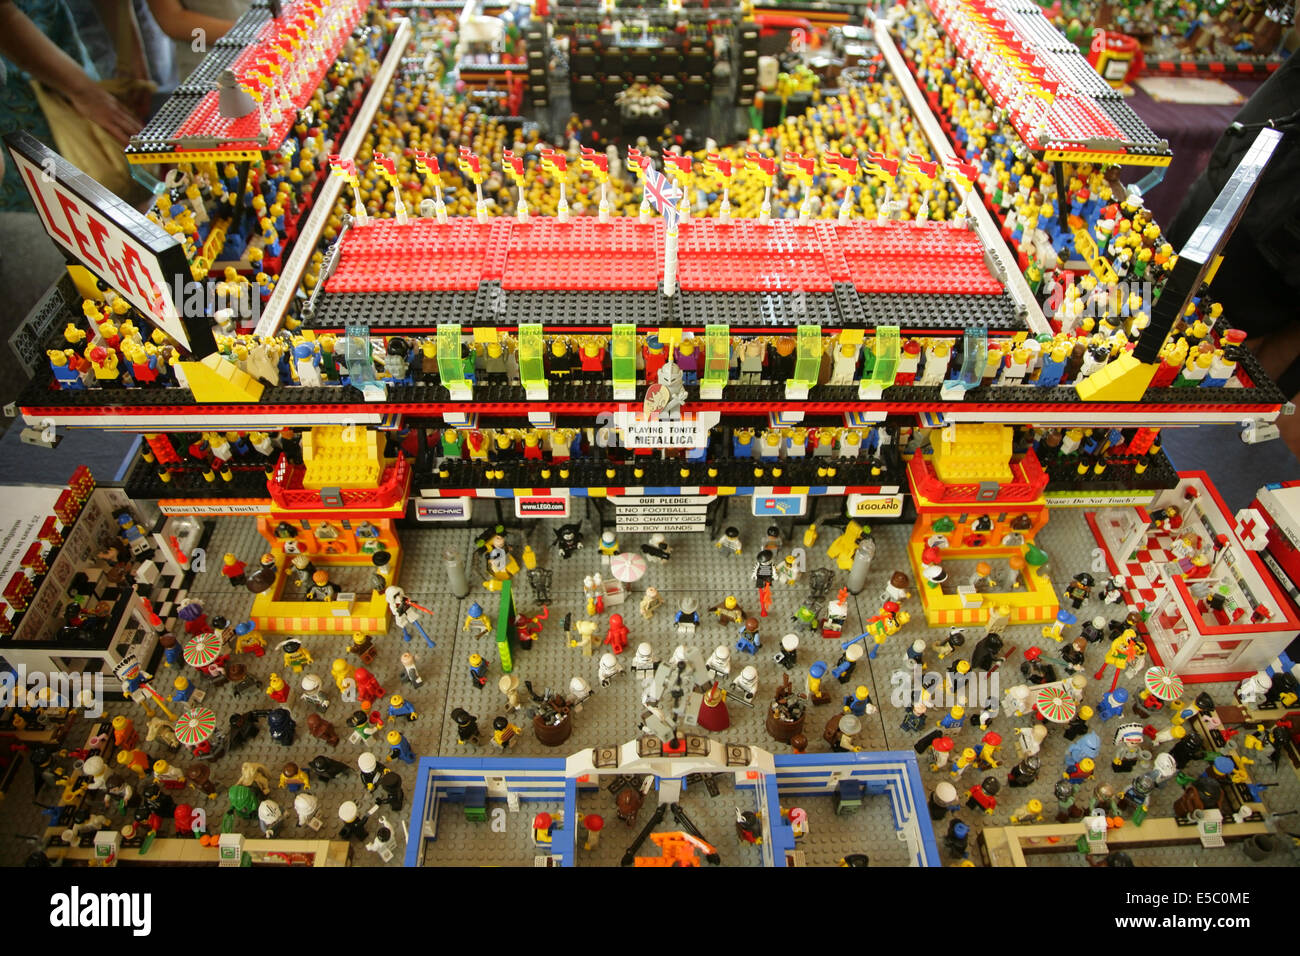 York, UK, 27 July 2014. A Lego version of rock band Metallica play a  stadium gig, at the annual York Lego Show at the University of York. The  show includes models built